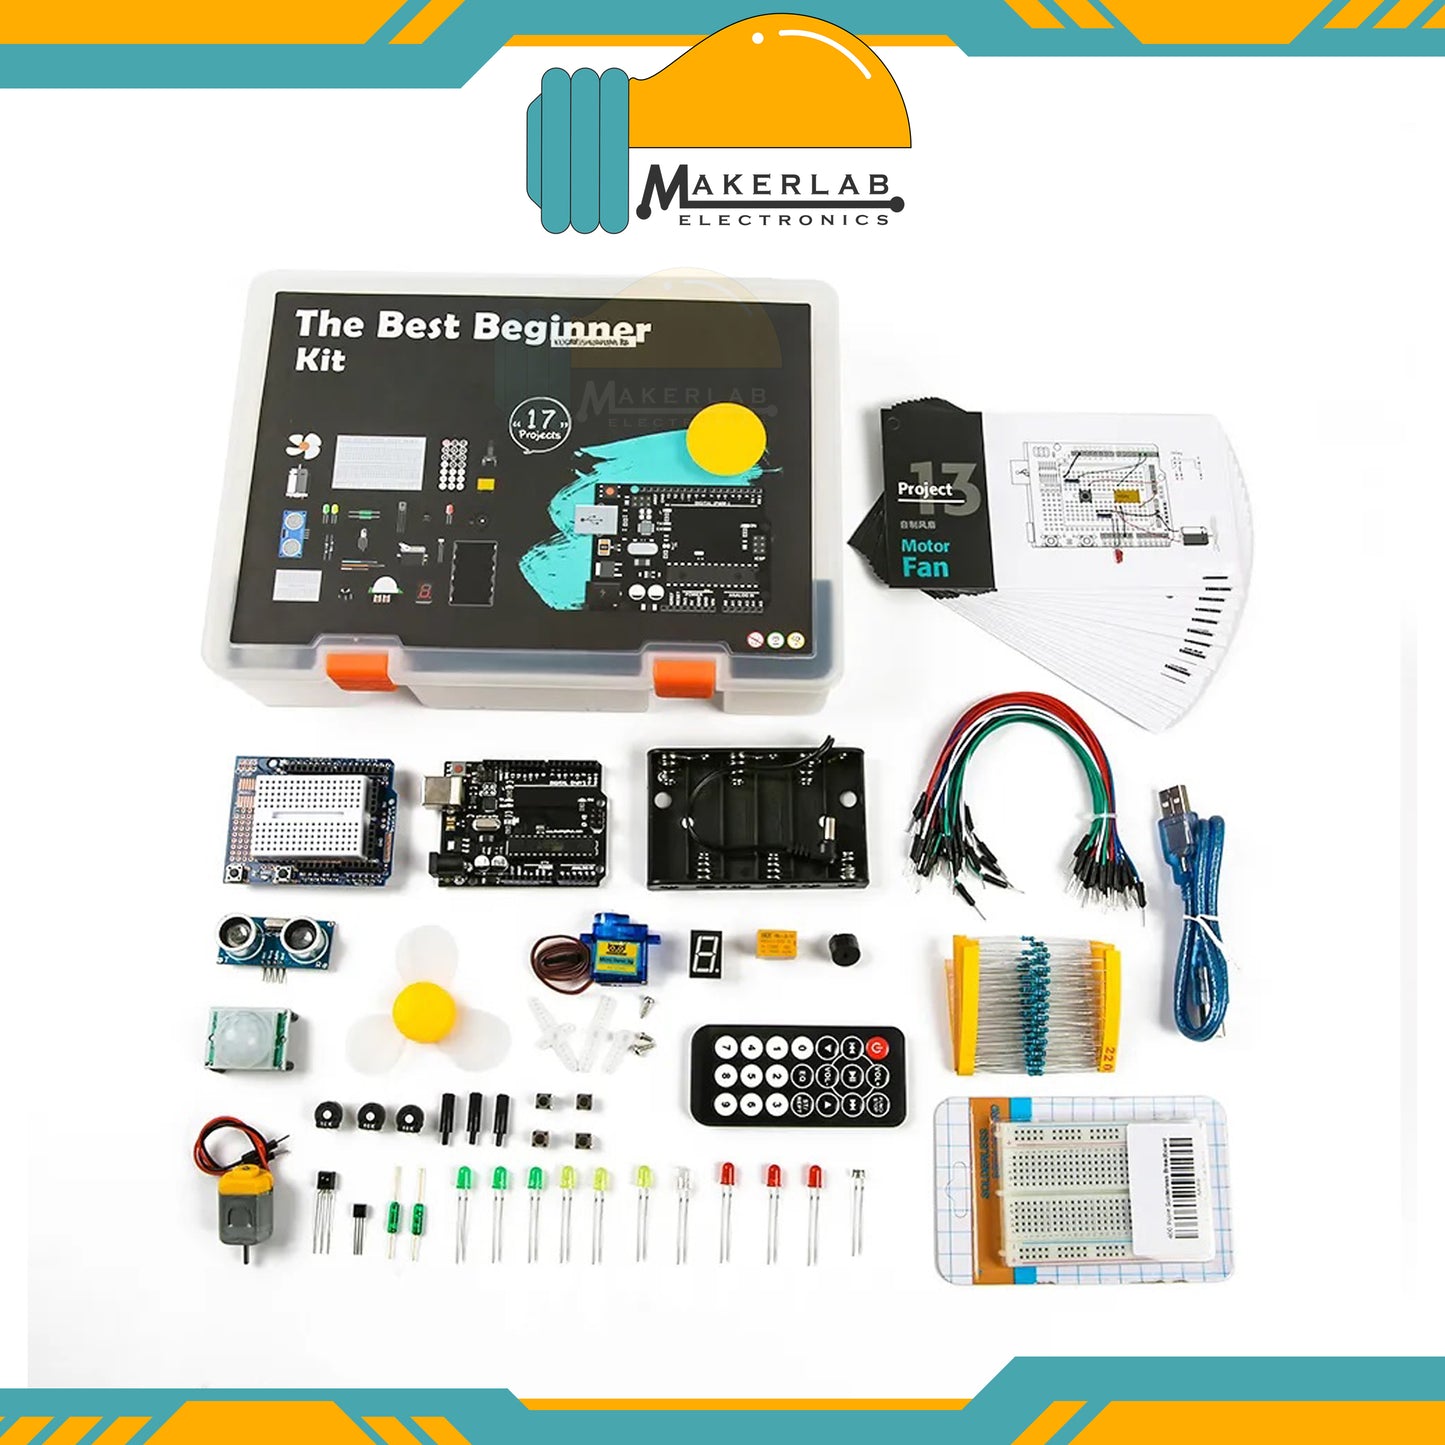 The Best Beginner Kit With Tutorial Compatible With Arduino IDE "17 Projects"  Generic Beginner Starter Kit for Arduino